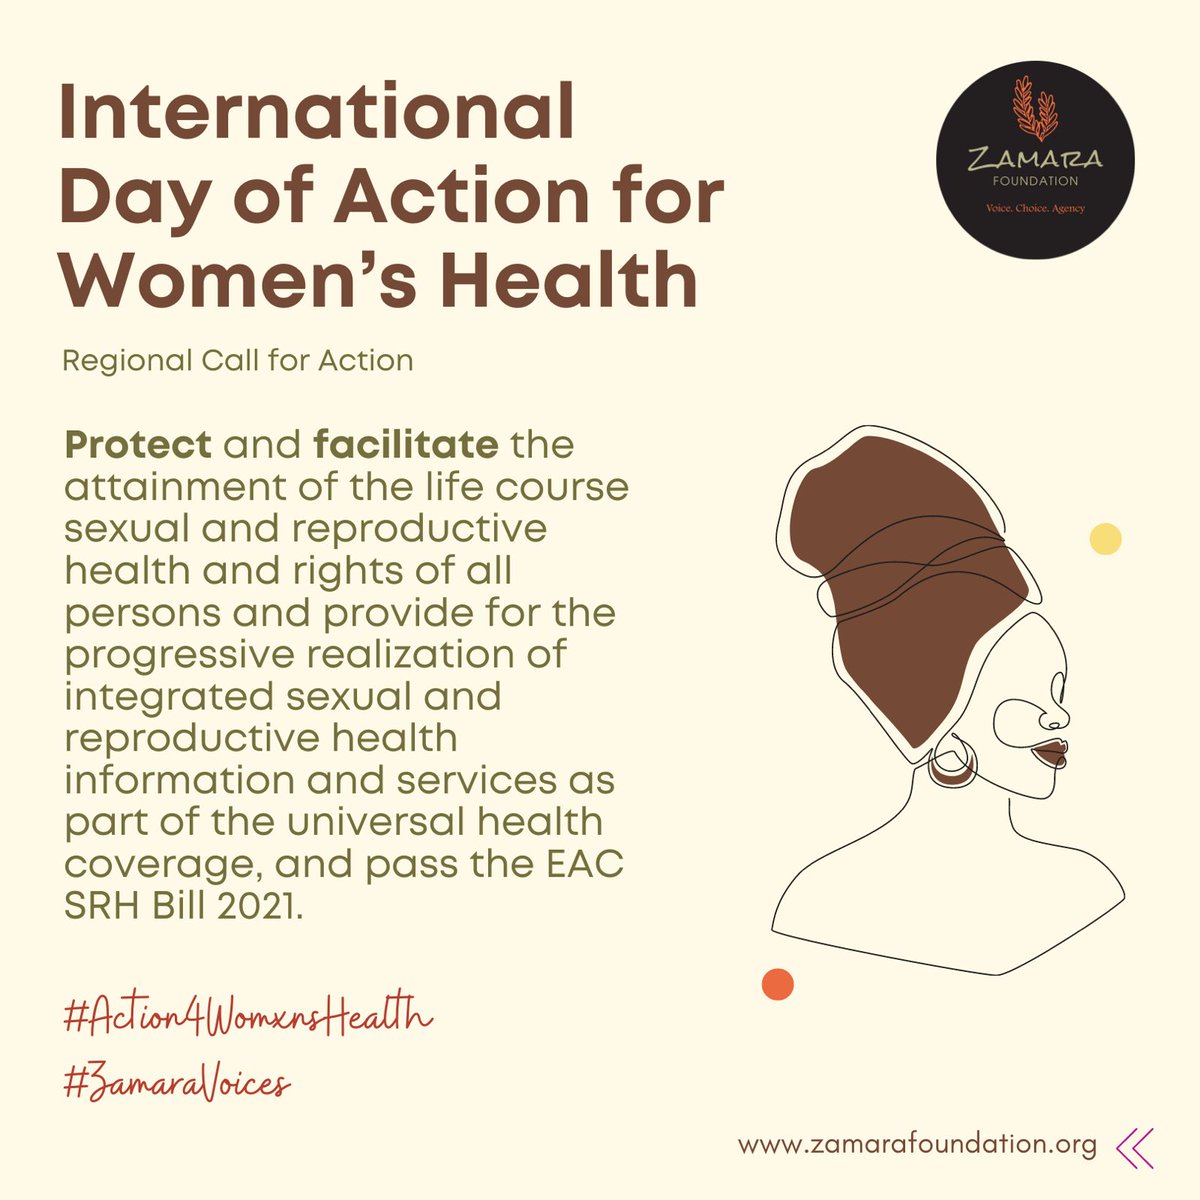 By passing the EAC SRH Bill women's health will be a priority. 
#Action4WomxnsHealth
#WomenHealthMatters
#ZamaraVoices